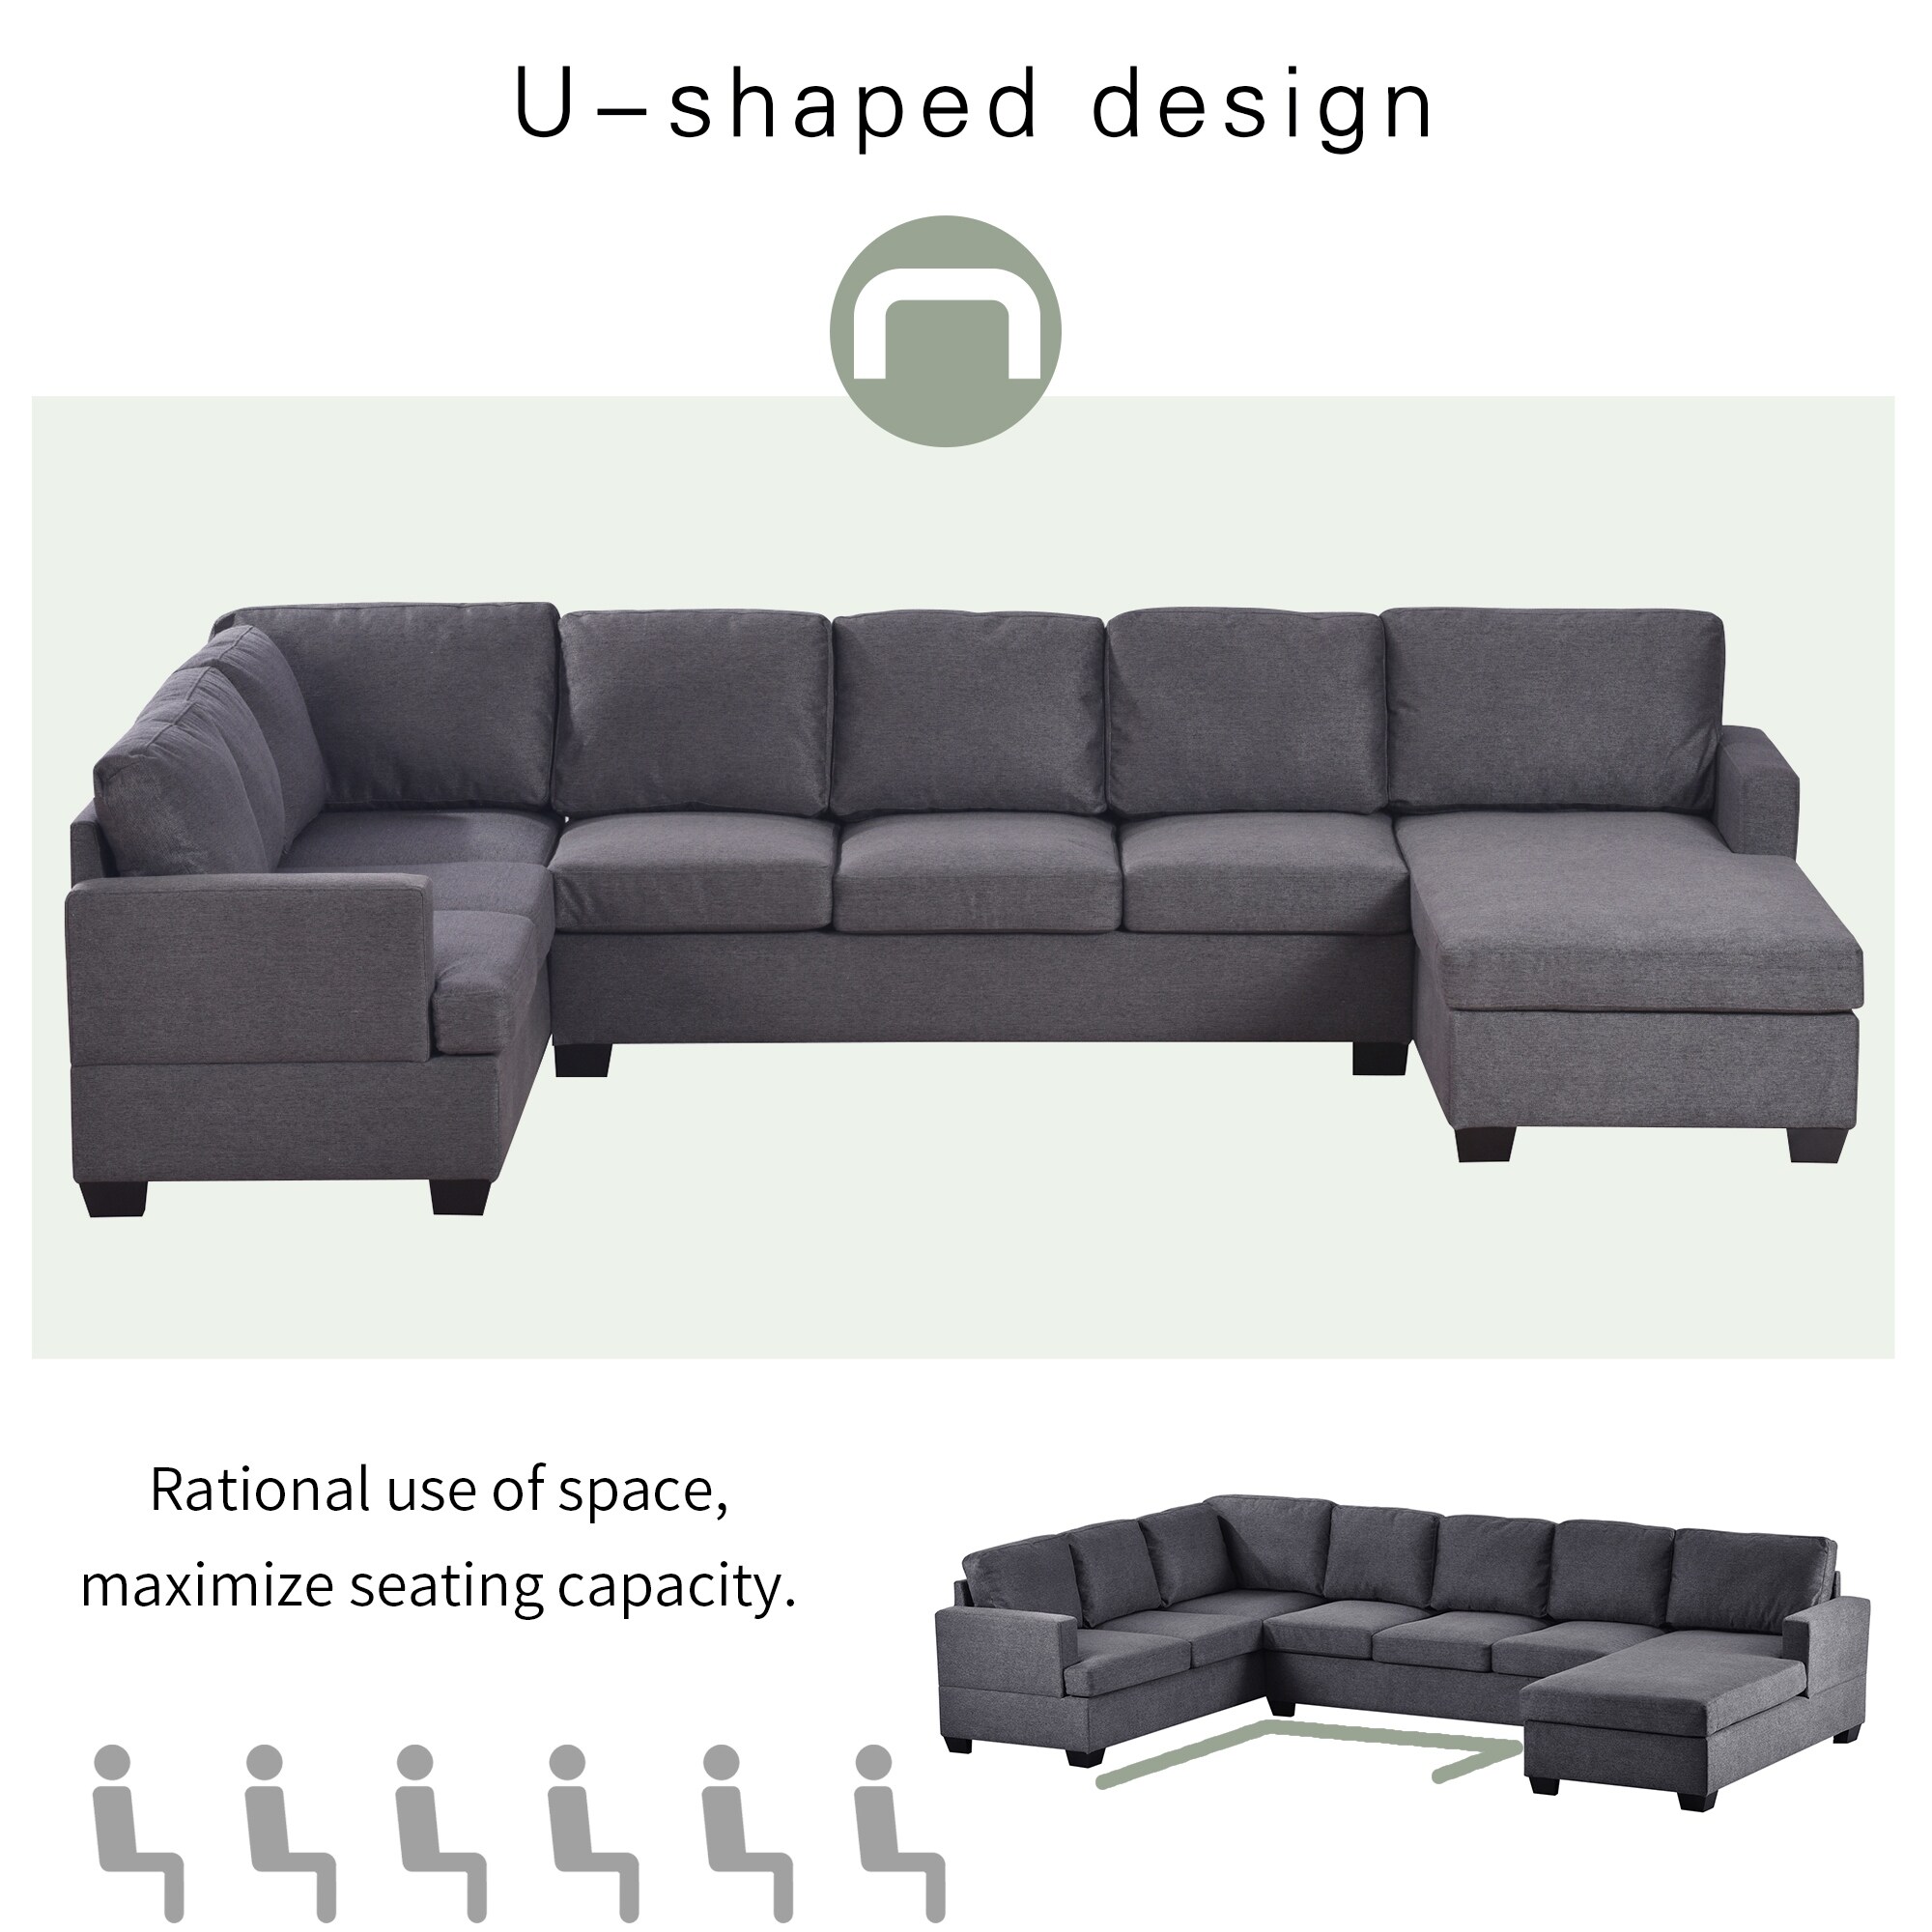 Large Upholstered U-Shape Sectional Sofa Set Modern Extra Wide Chaise Lounge Couch with Removable Cushions Corner Sofa Set